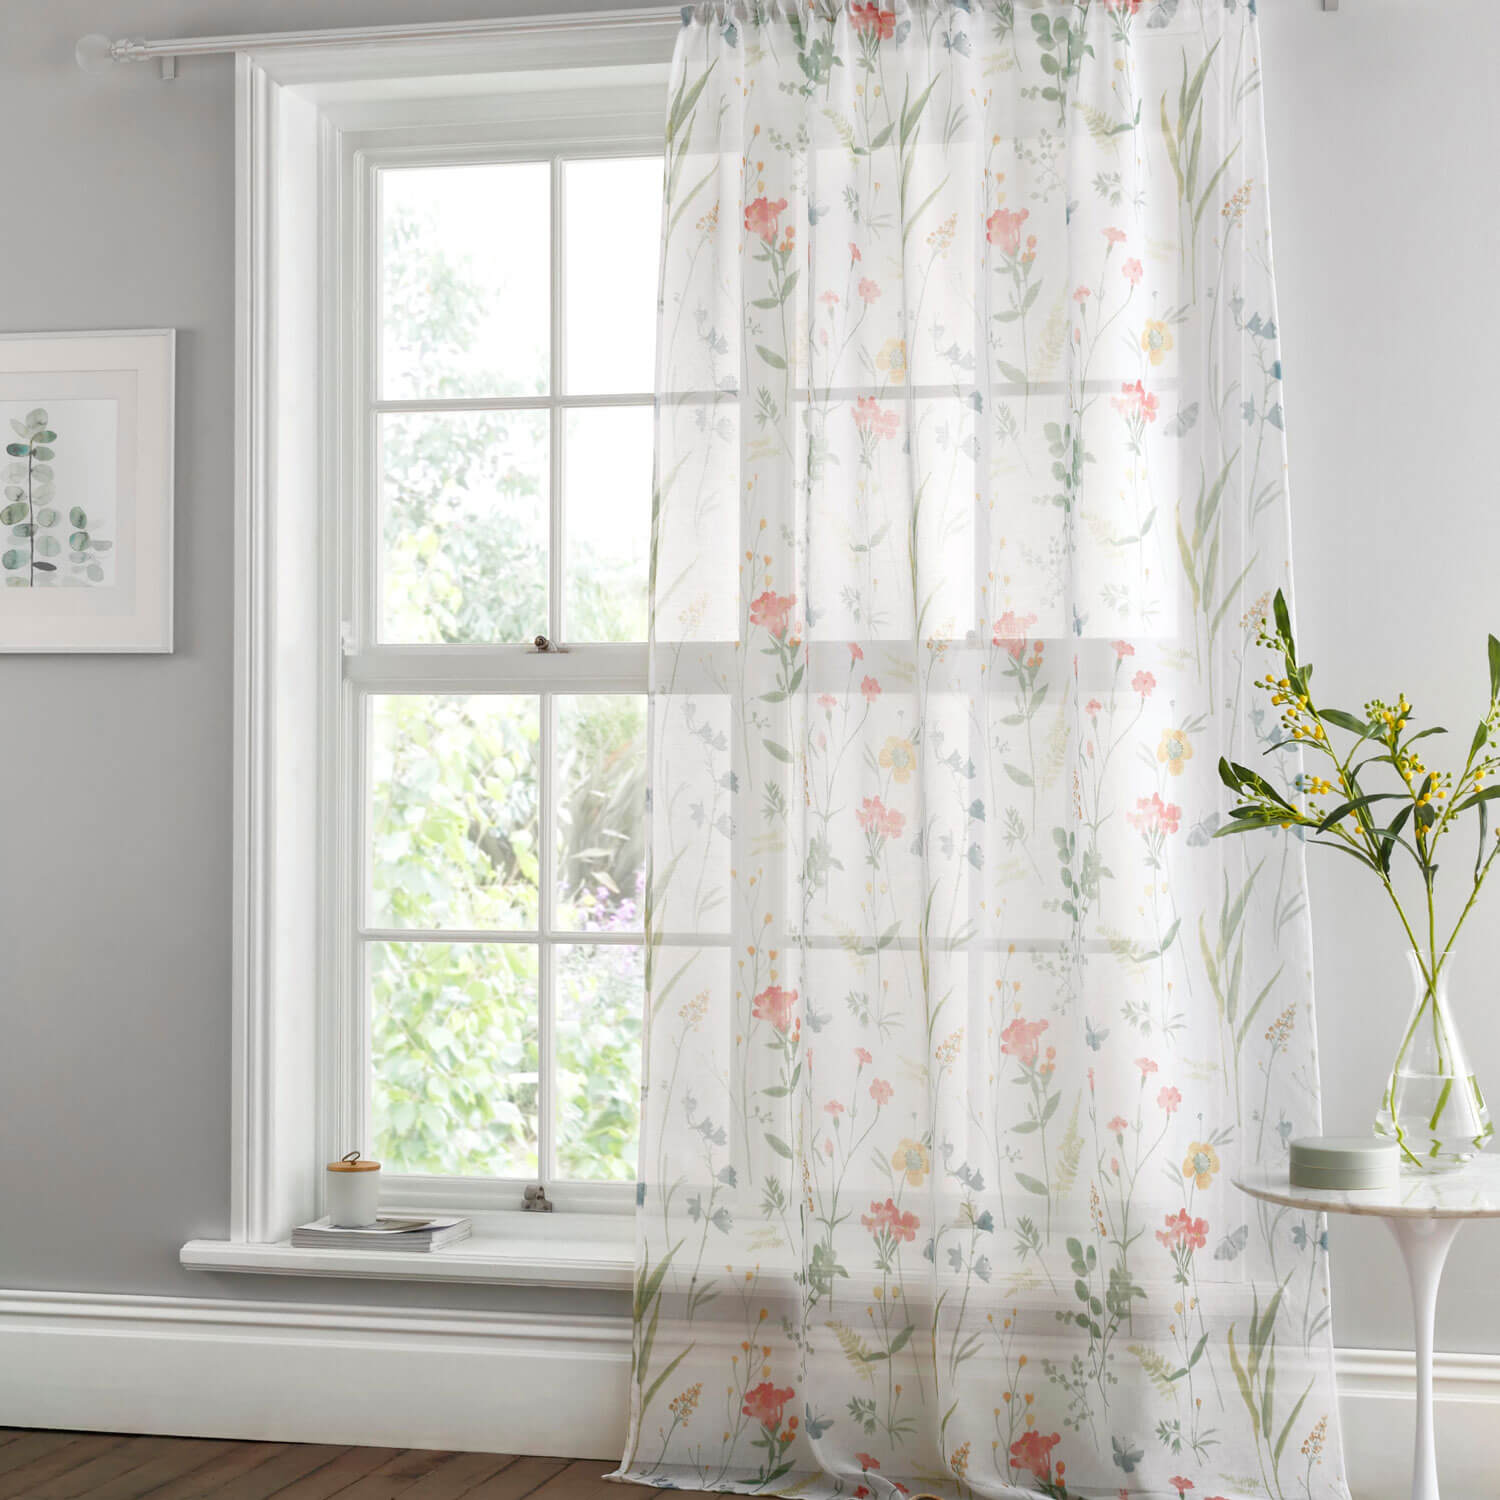 The Home Collection Summer Burst Printed Voile Curtains - 140x228 1 Shaws Department Stores